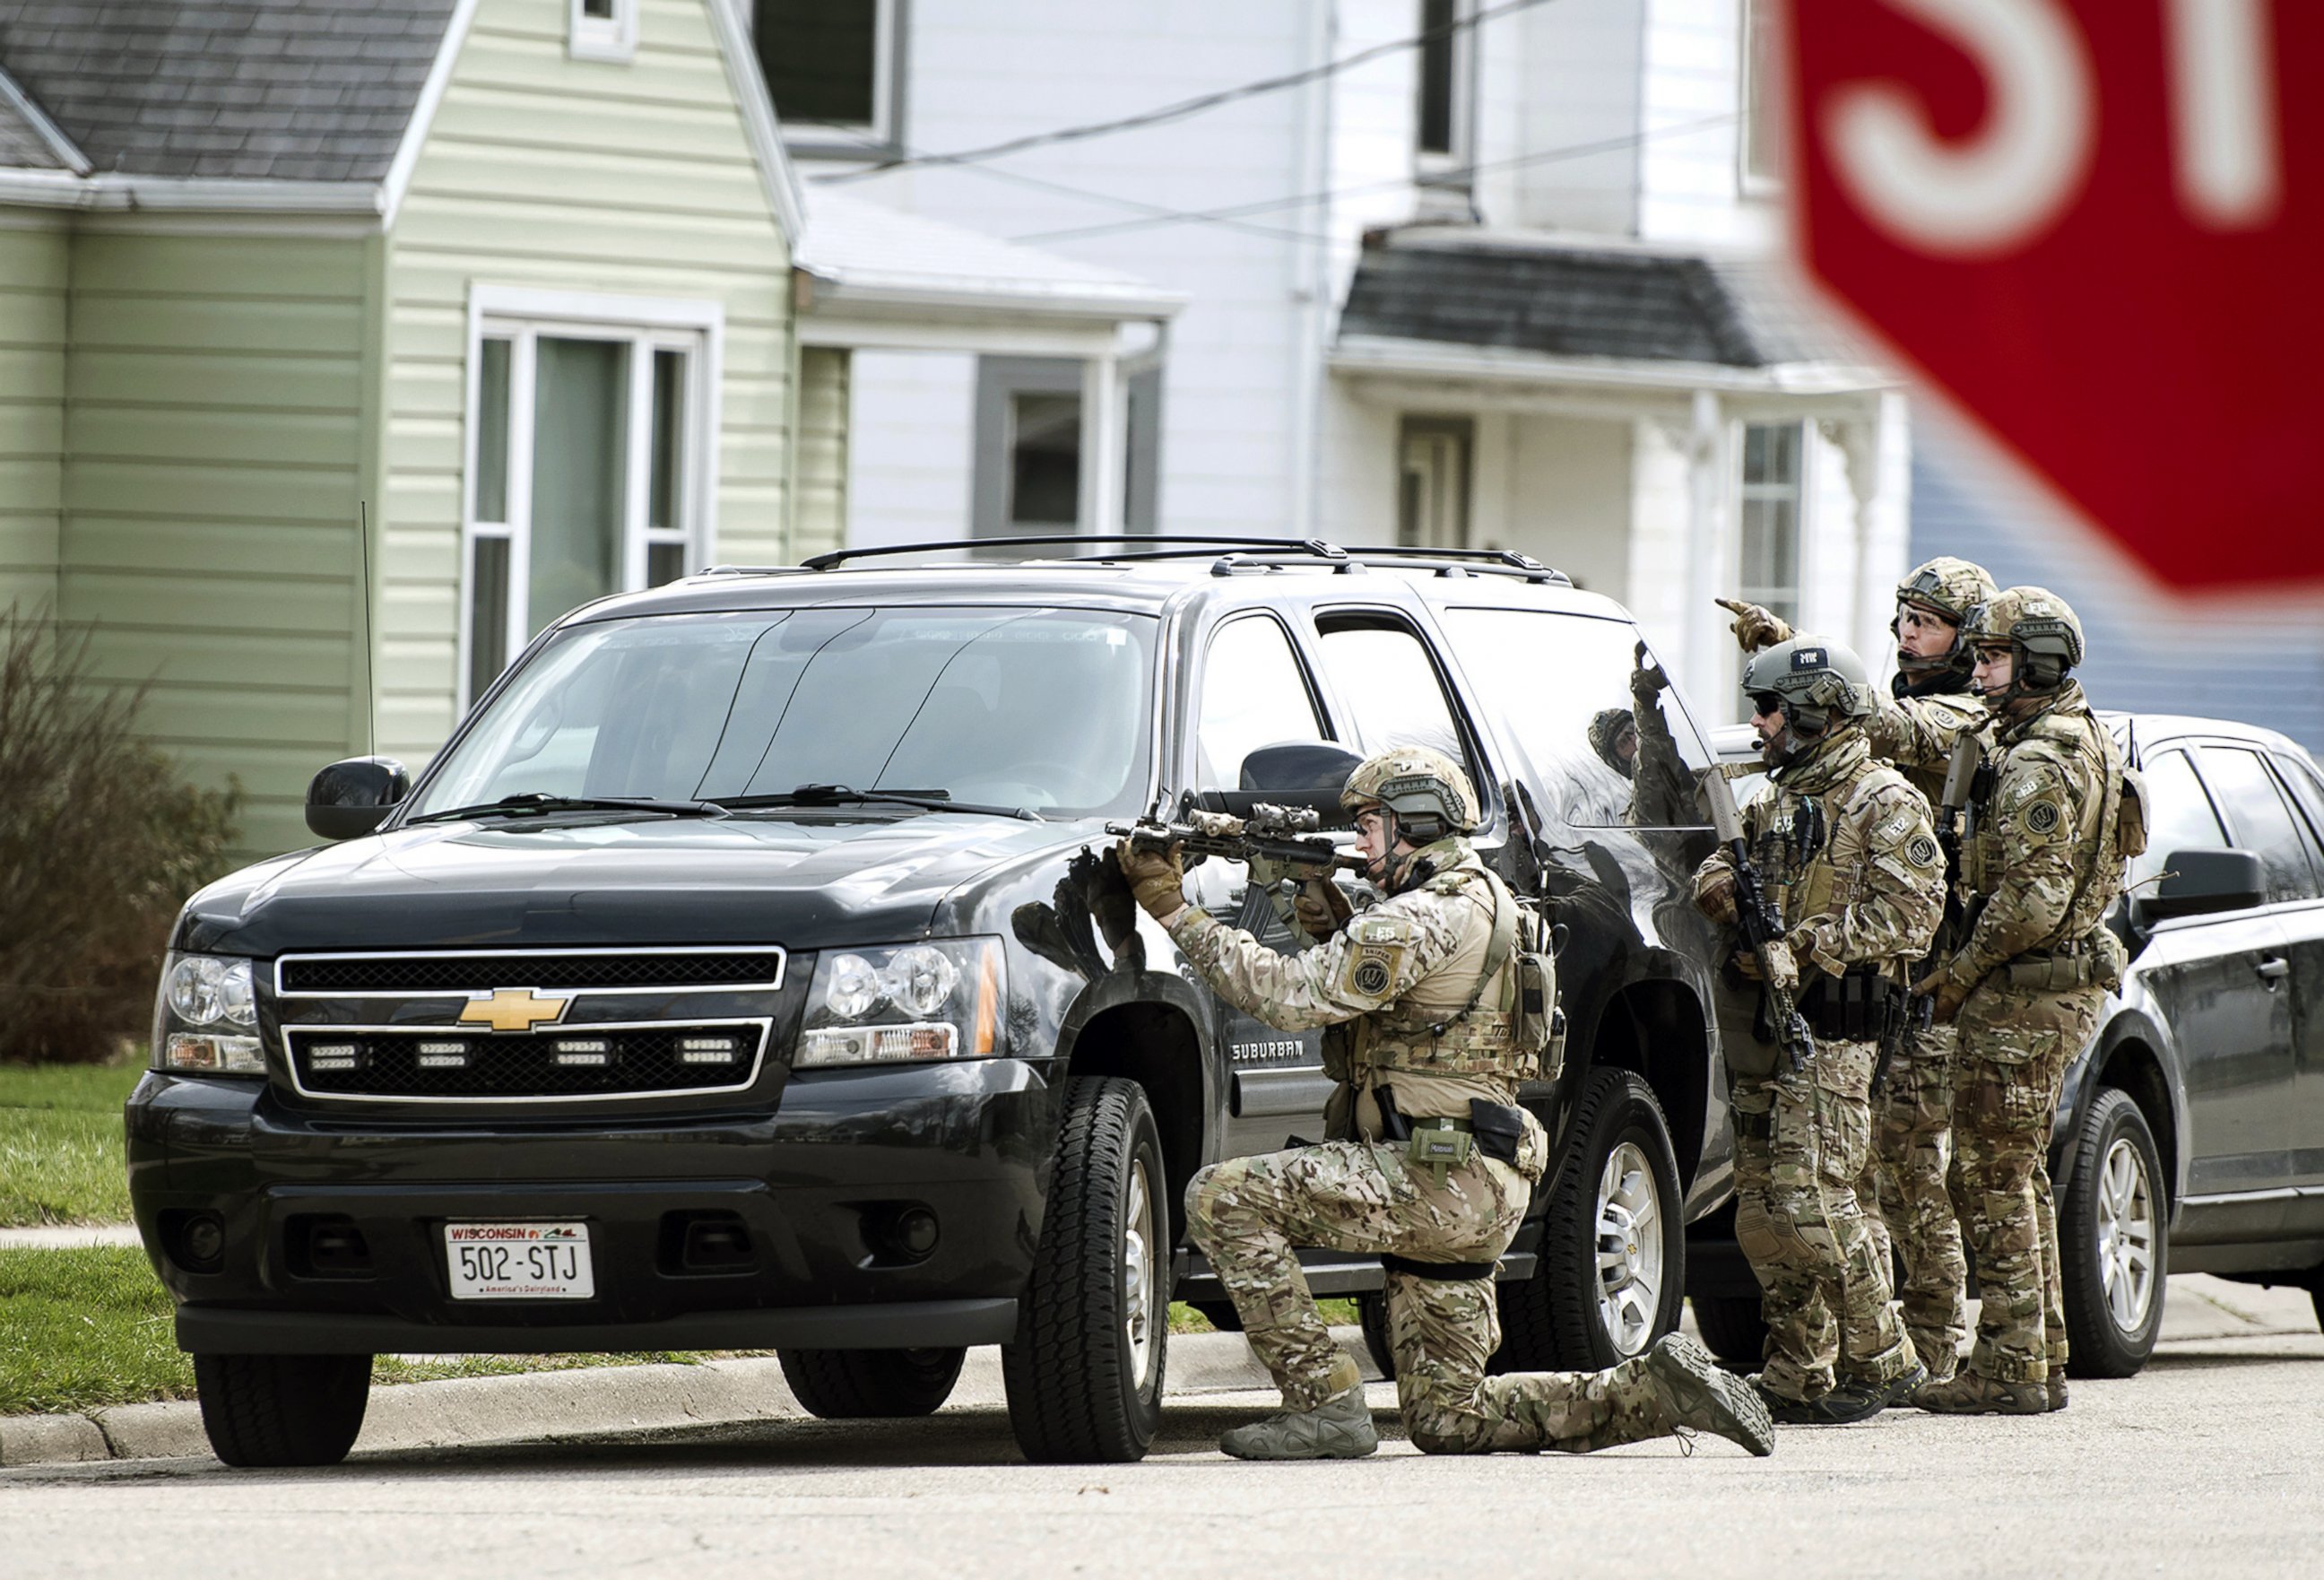 PHOTO: In this Thursday, April 6, 2017, photo, FBI agents provide tactical support to sheriff's detectives during a search for Joseph Jakubowski, in Janesville, Wis.